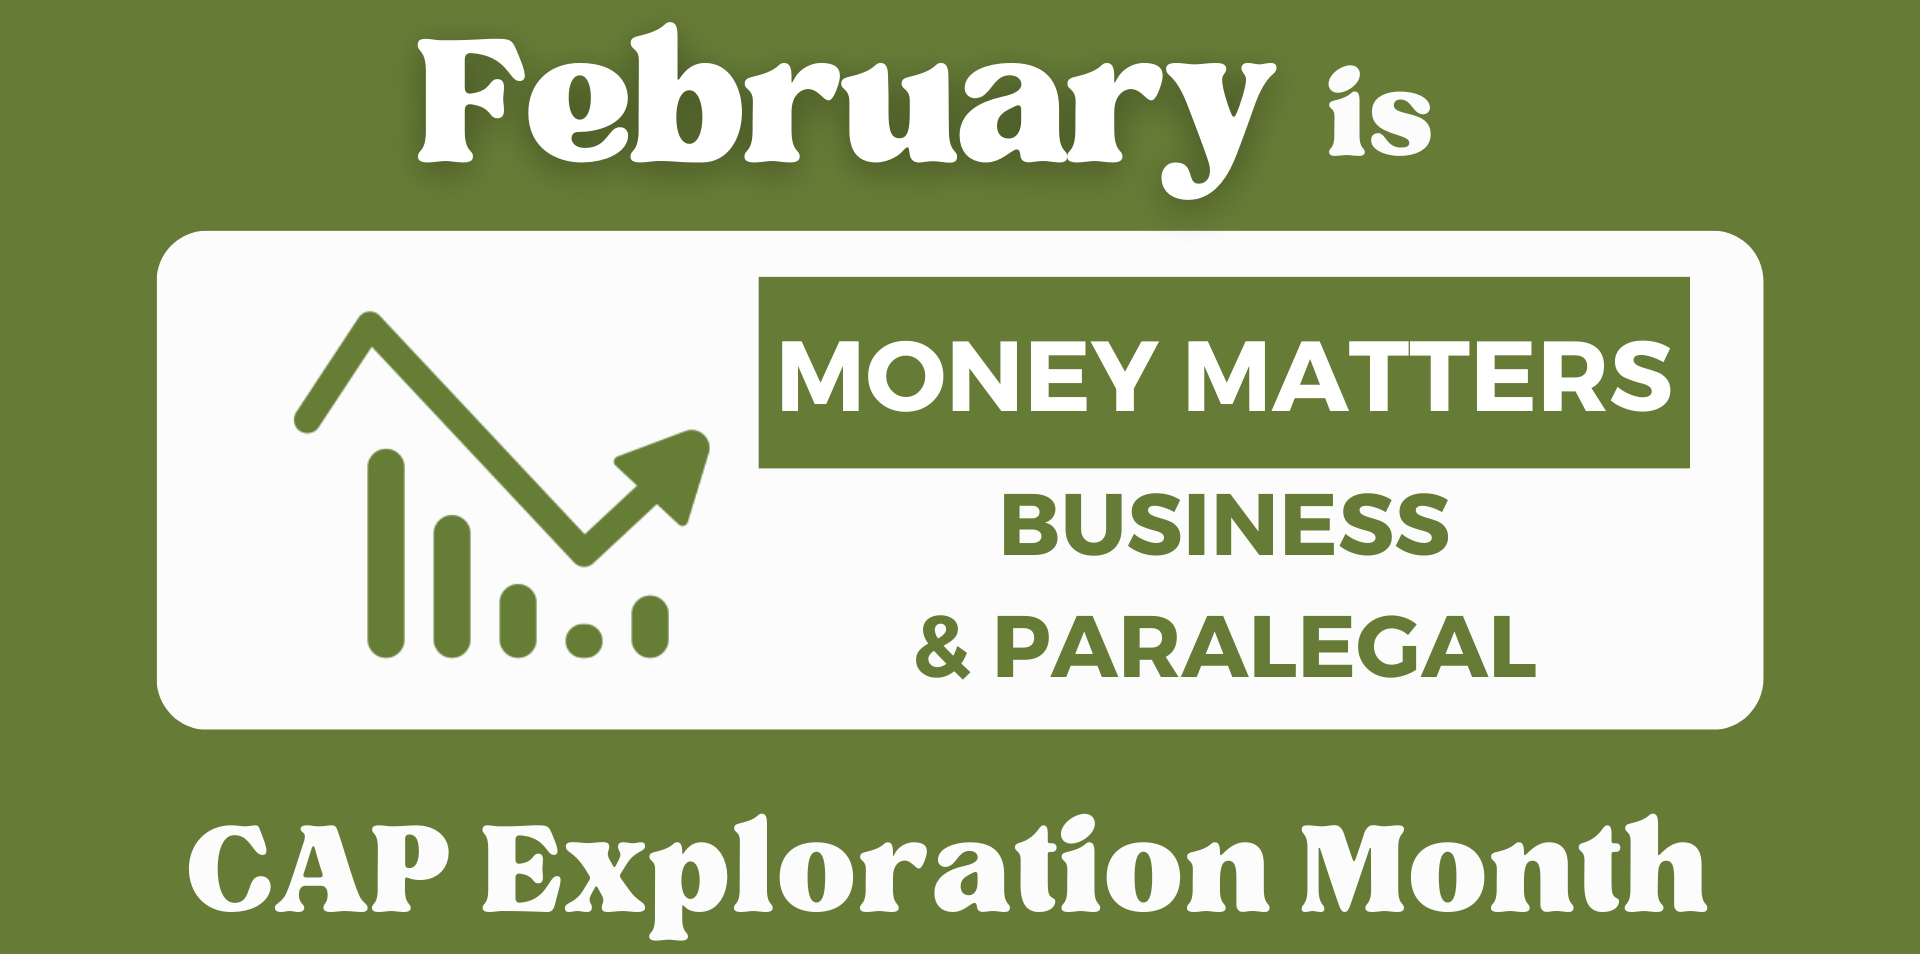 FEB is MONEY MATTERS month image